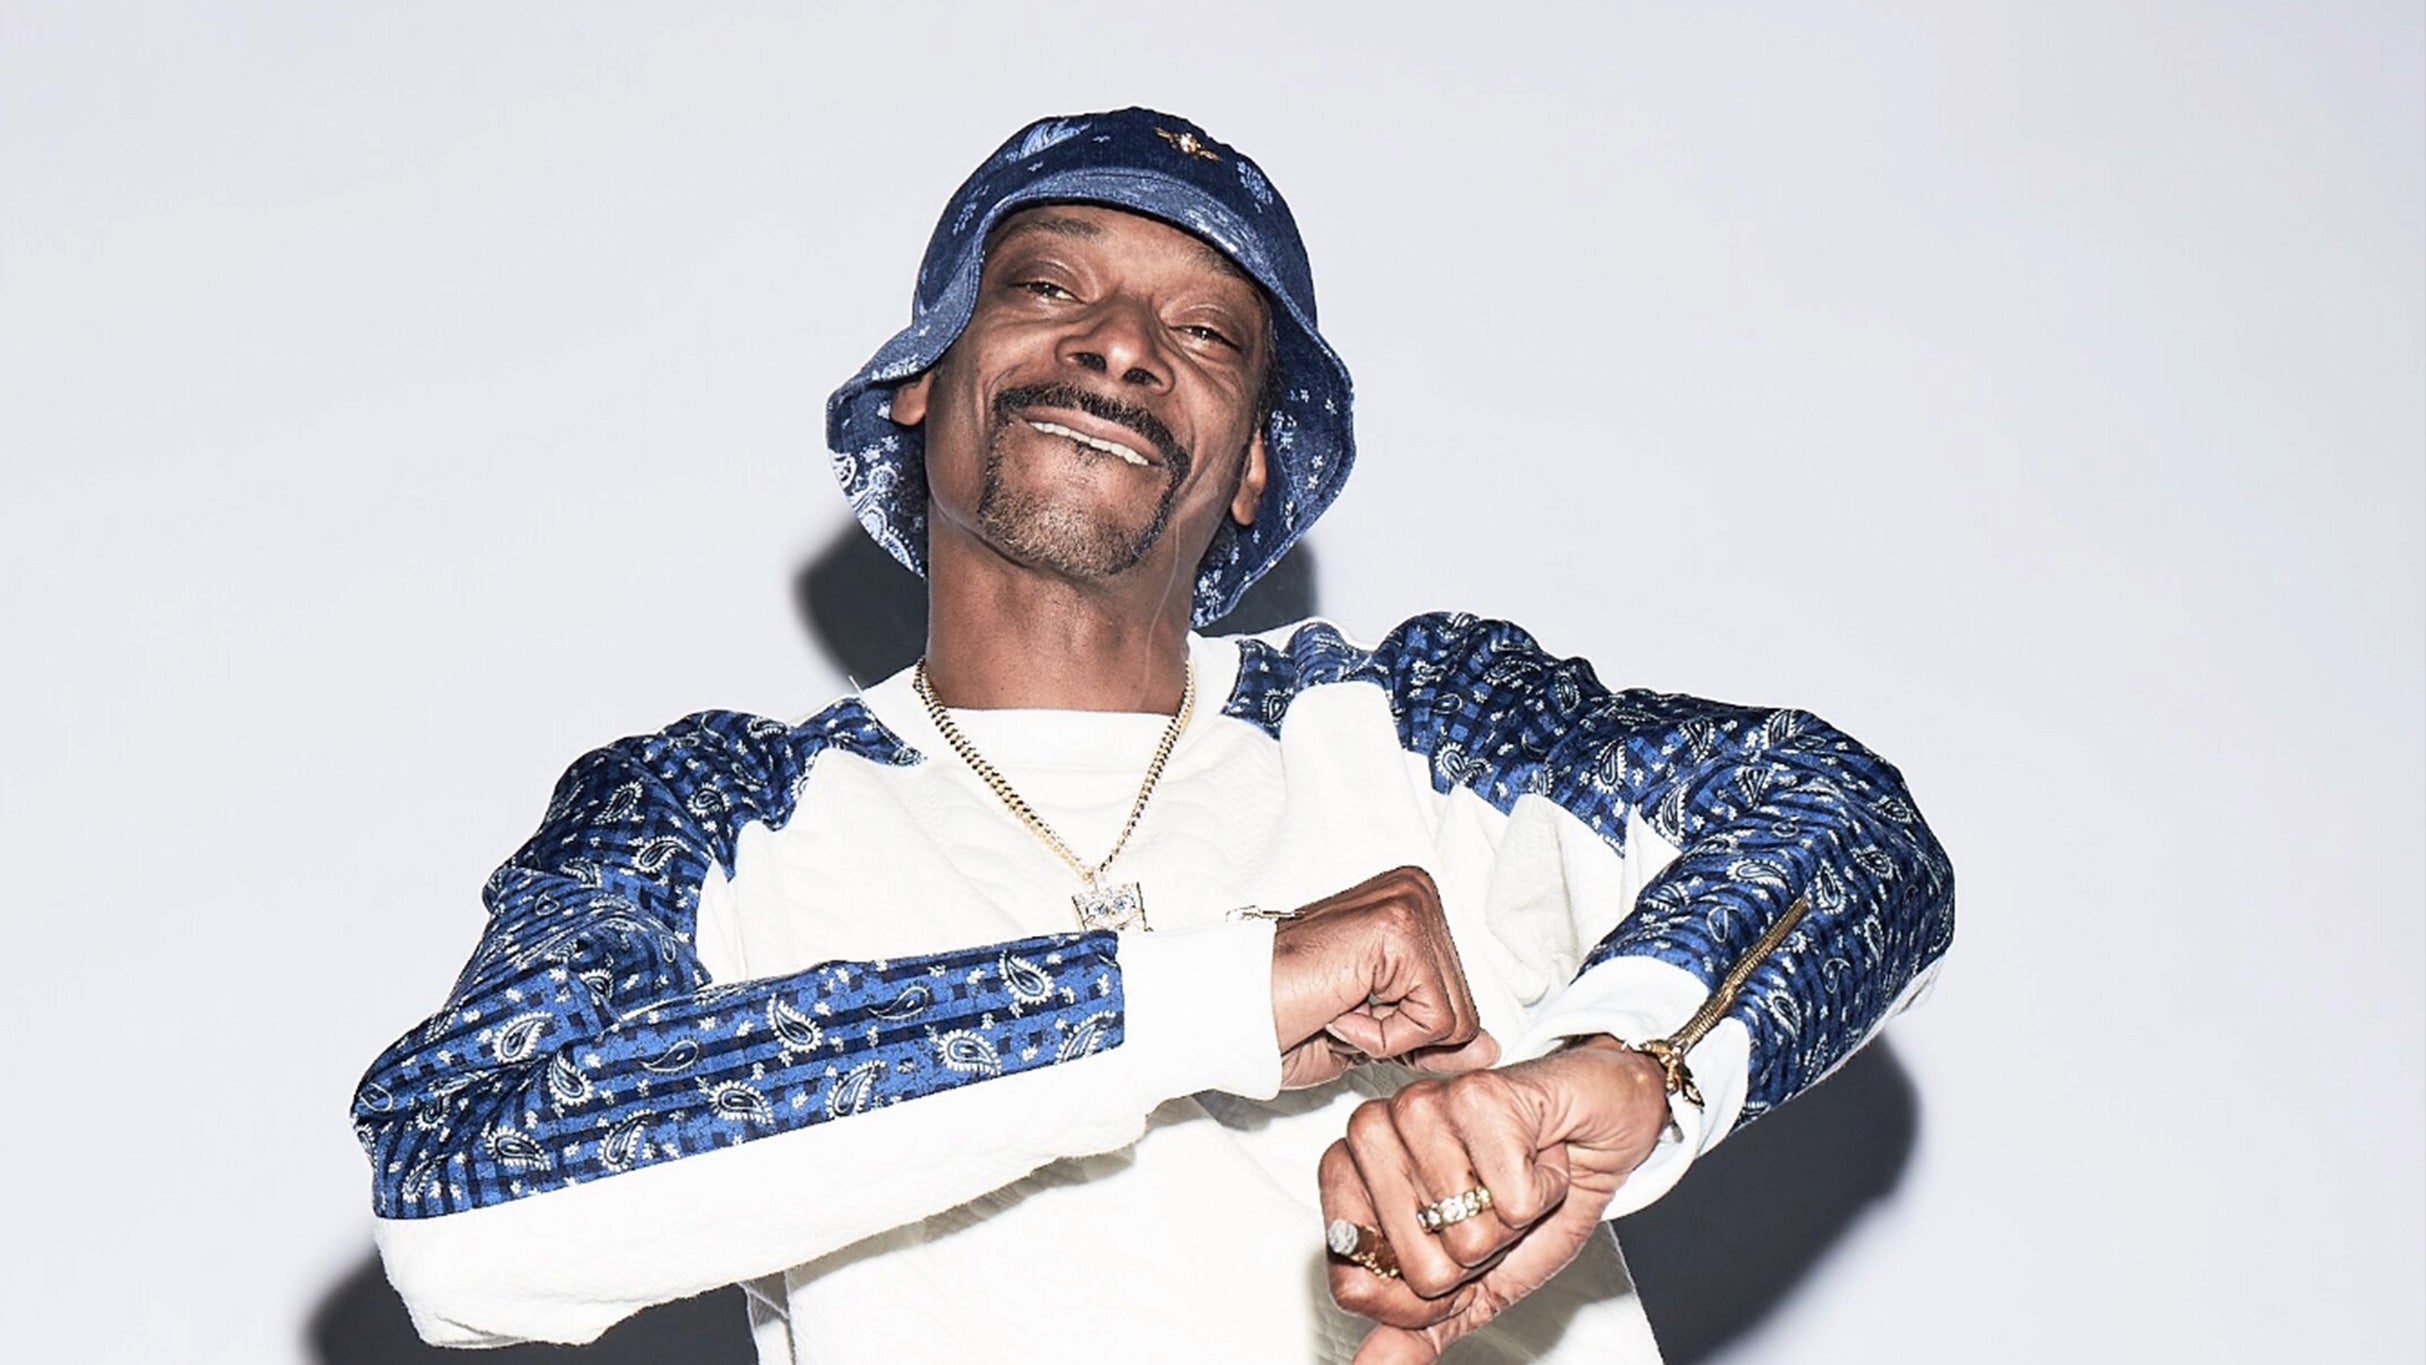 Snoop Dogg - Cali To Canada Tour  presales in Vancouver